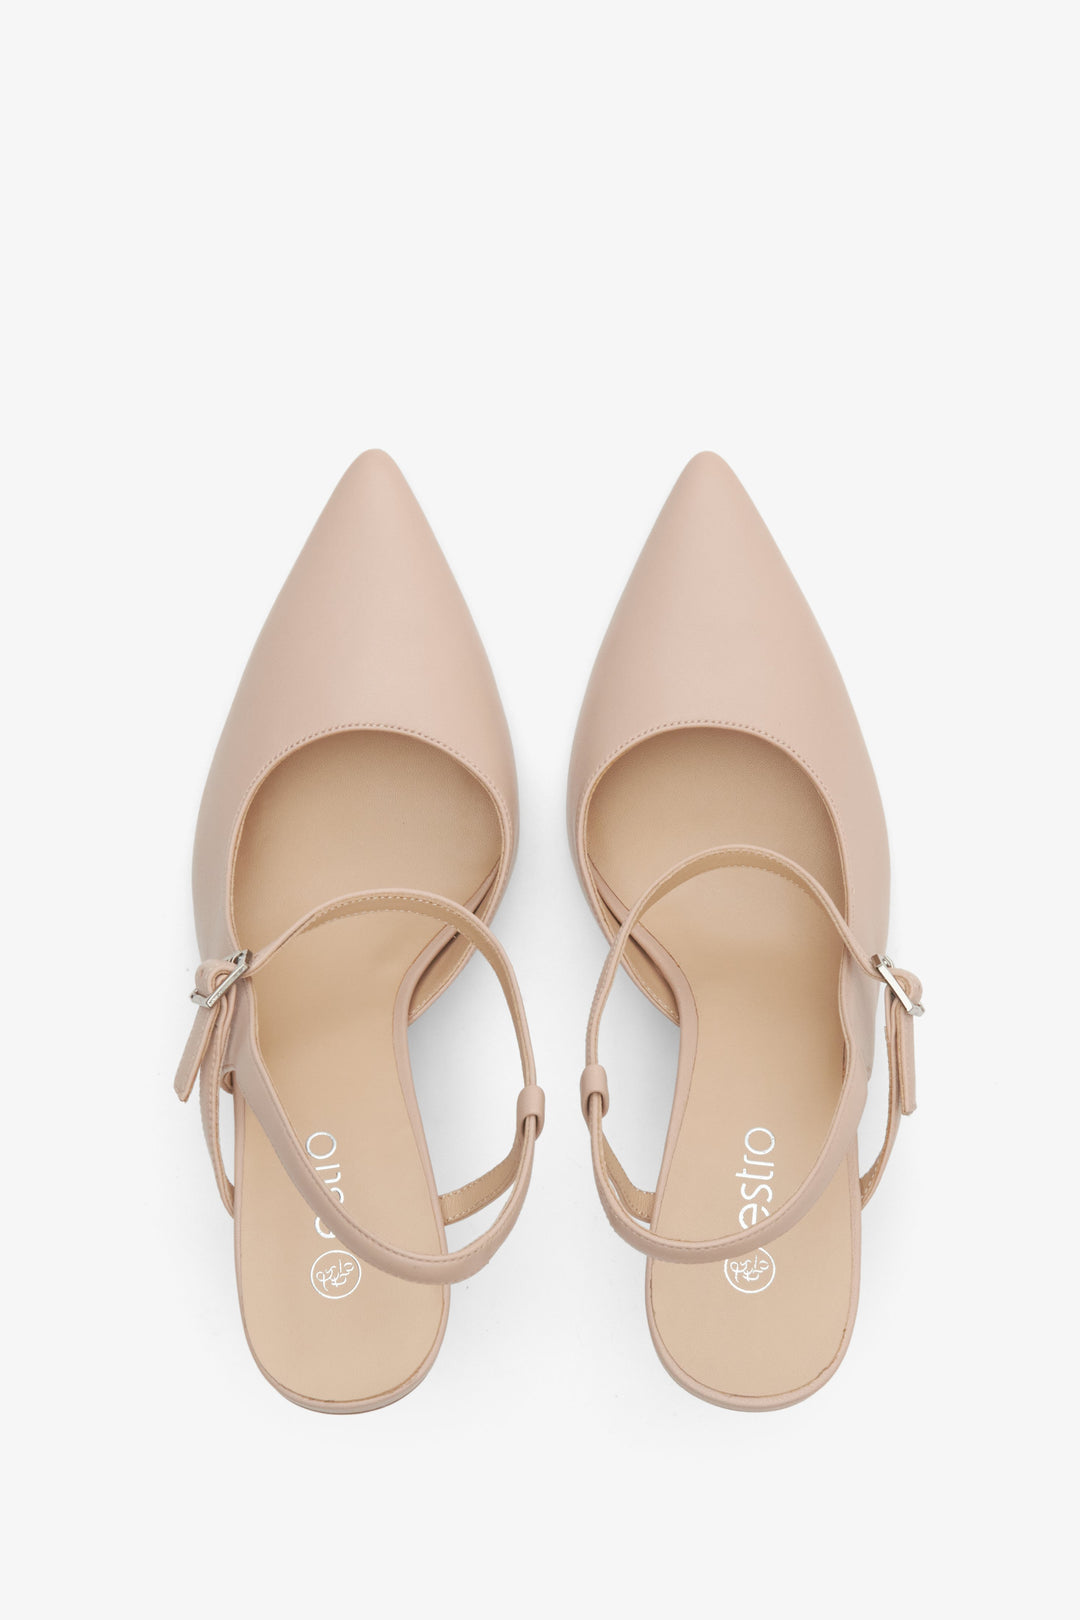 Women's beige leather slingback shoes with a pointed toe on a high heel - presentation form above.